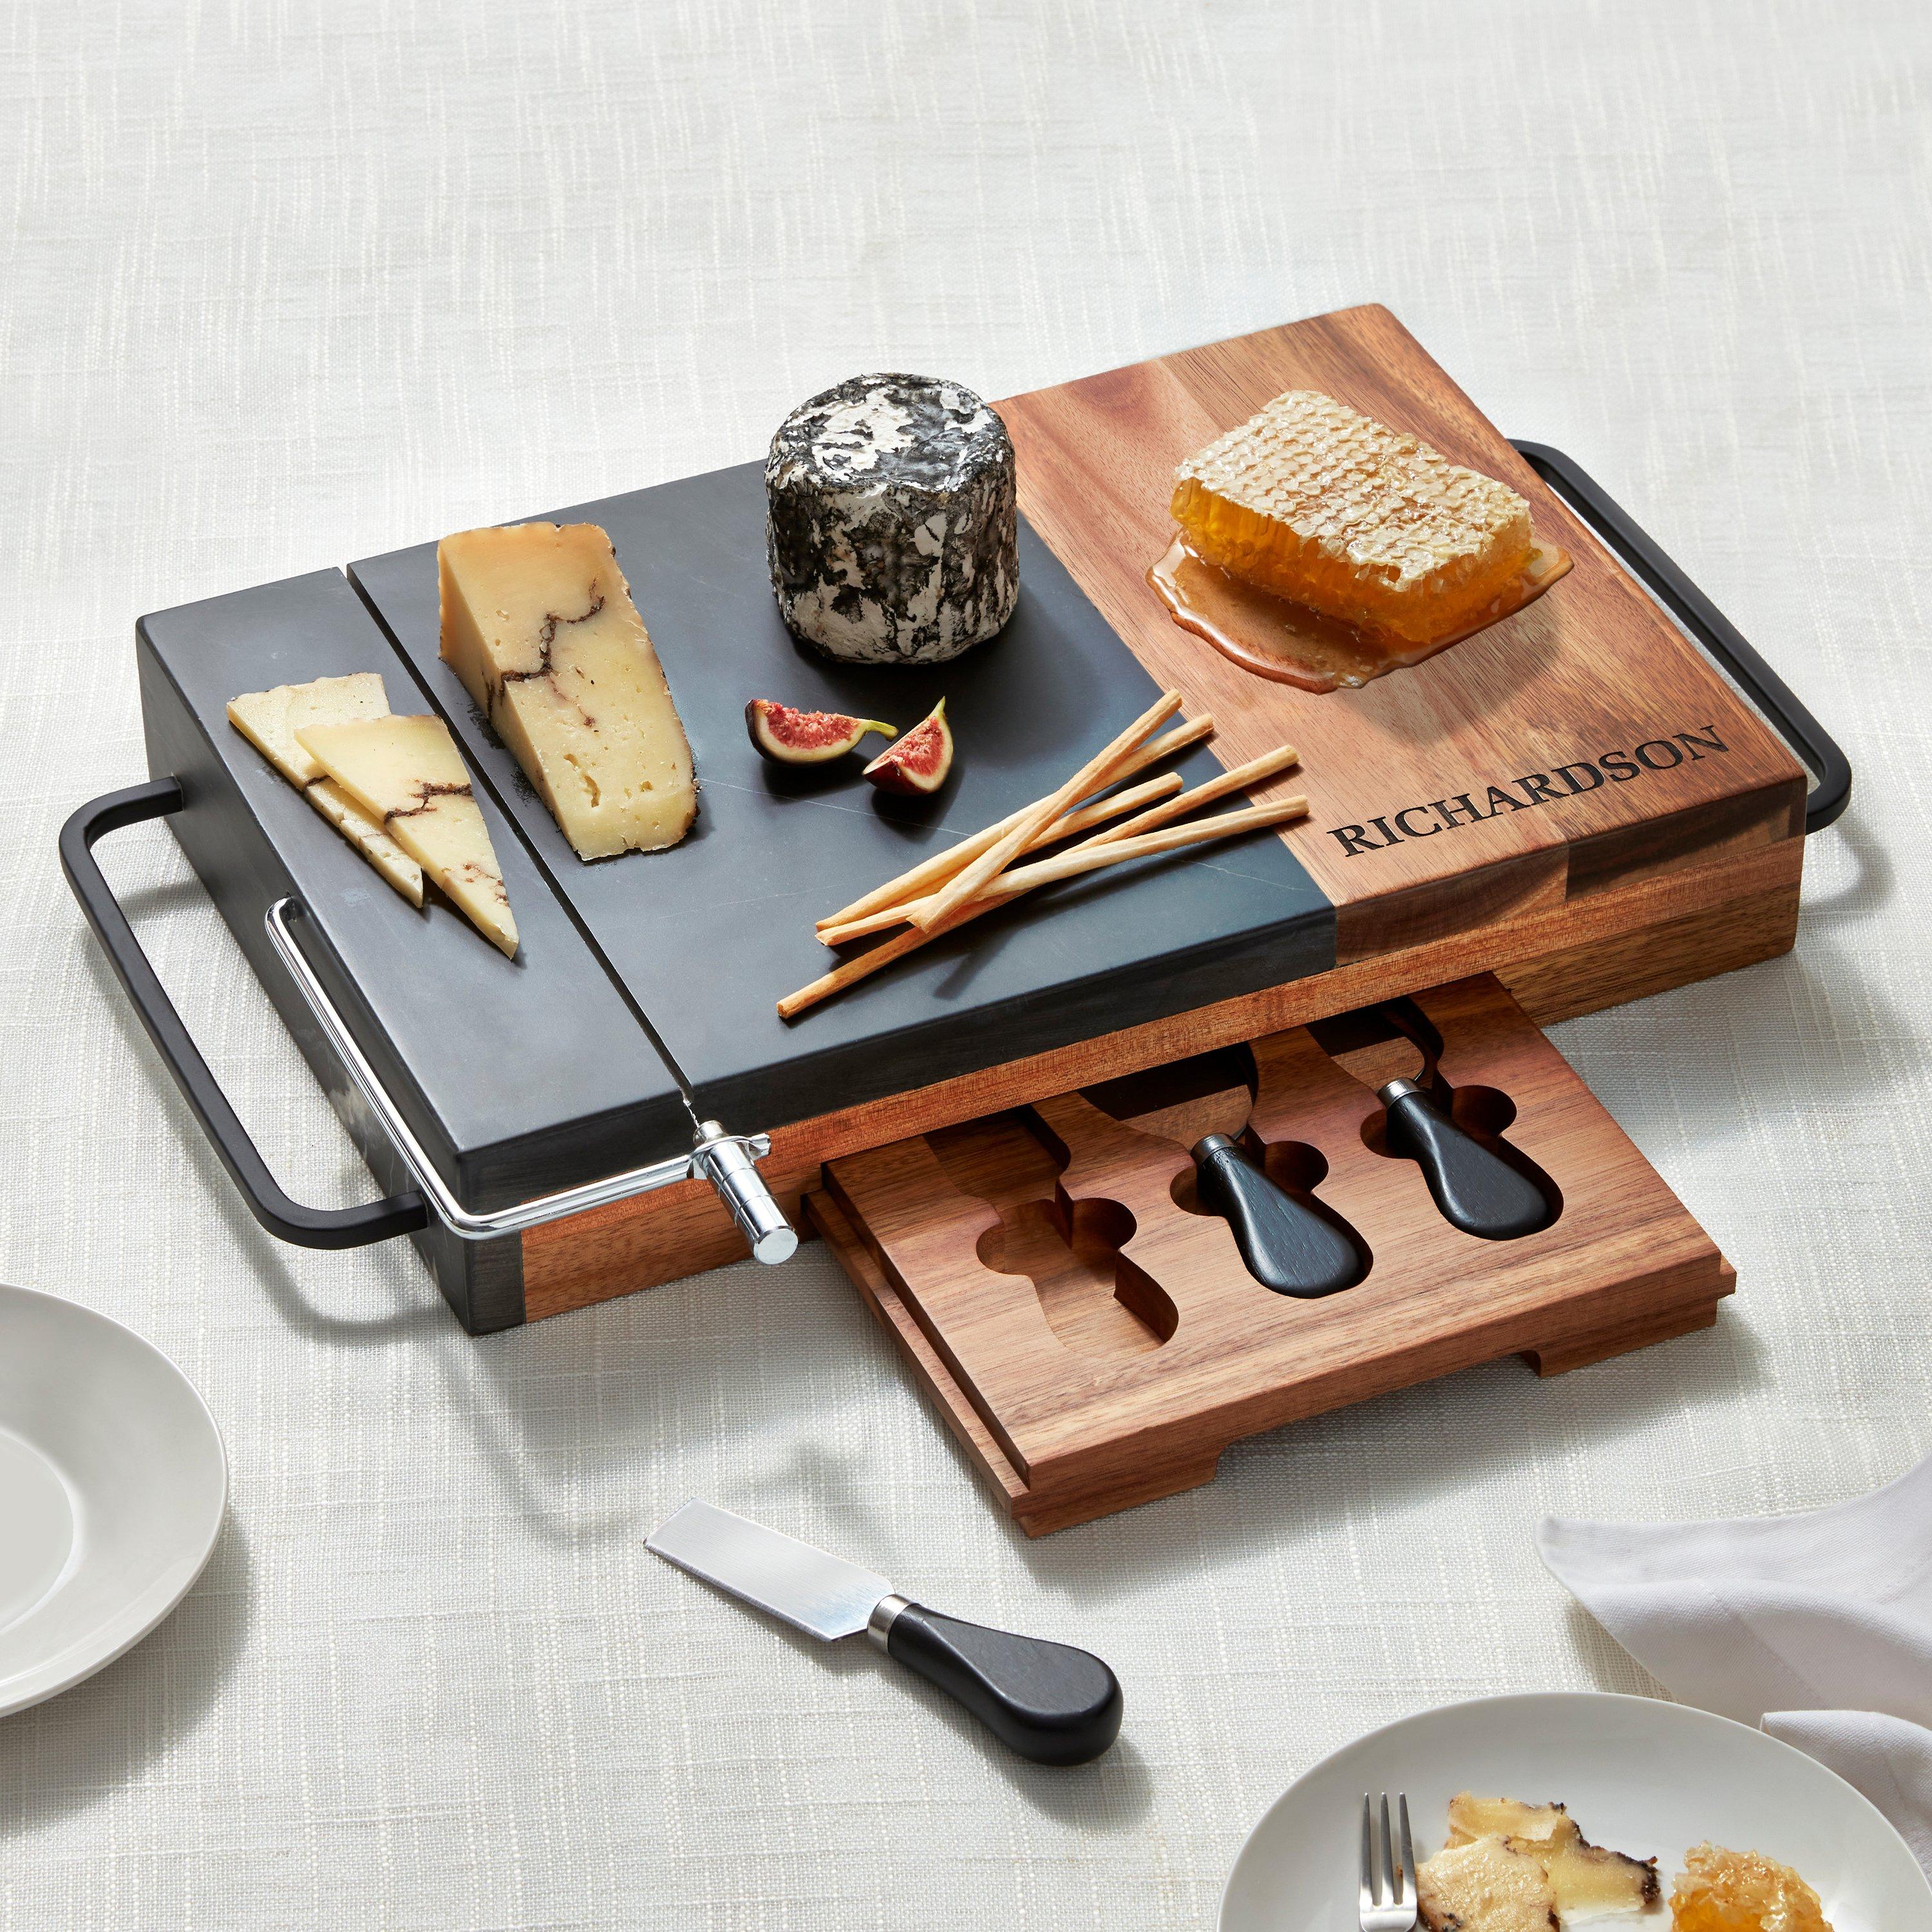 Kitchen items - plates knives storage containers cheese boards and